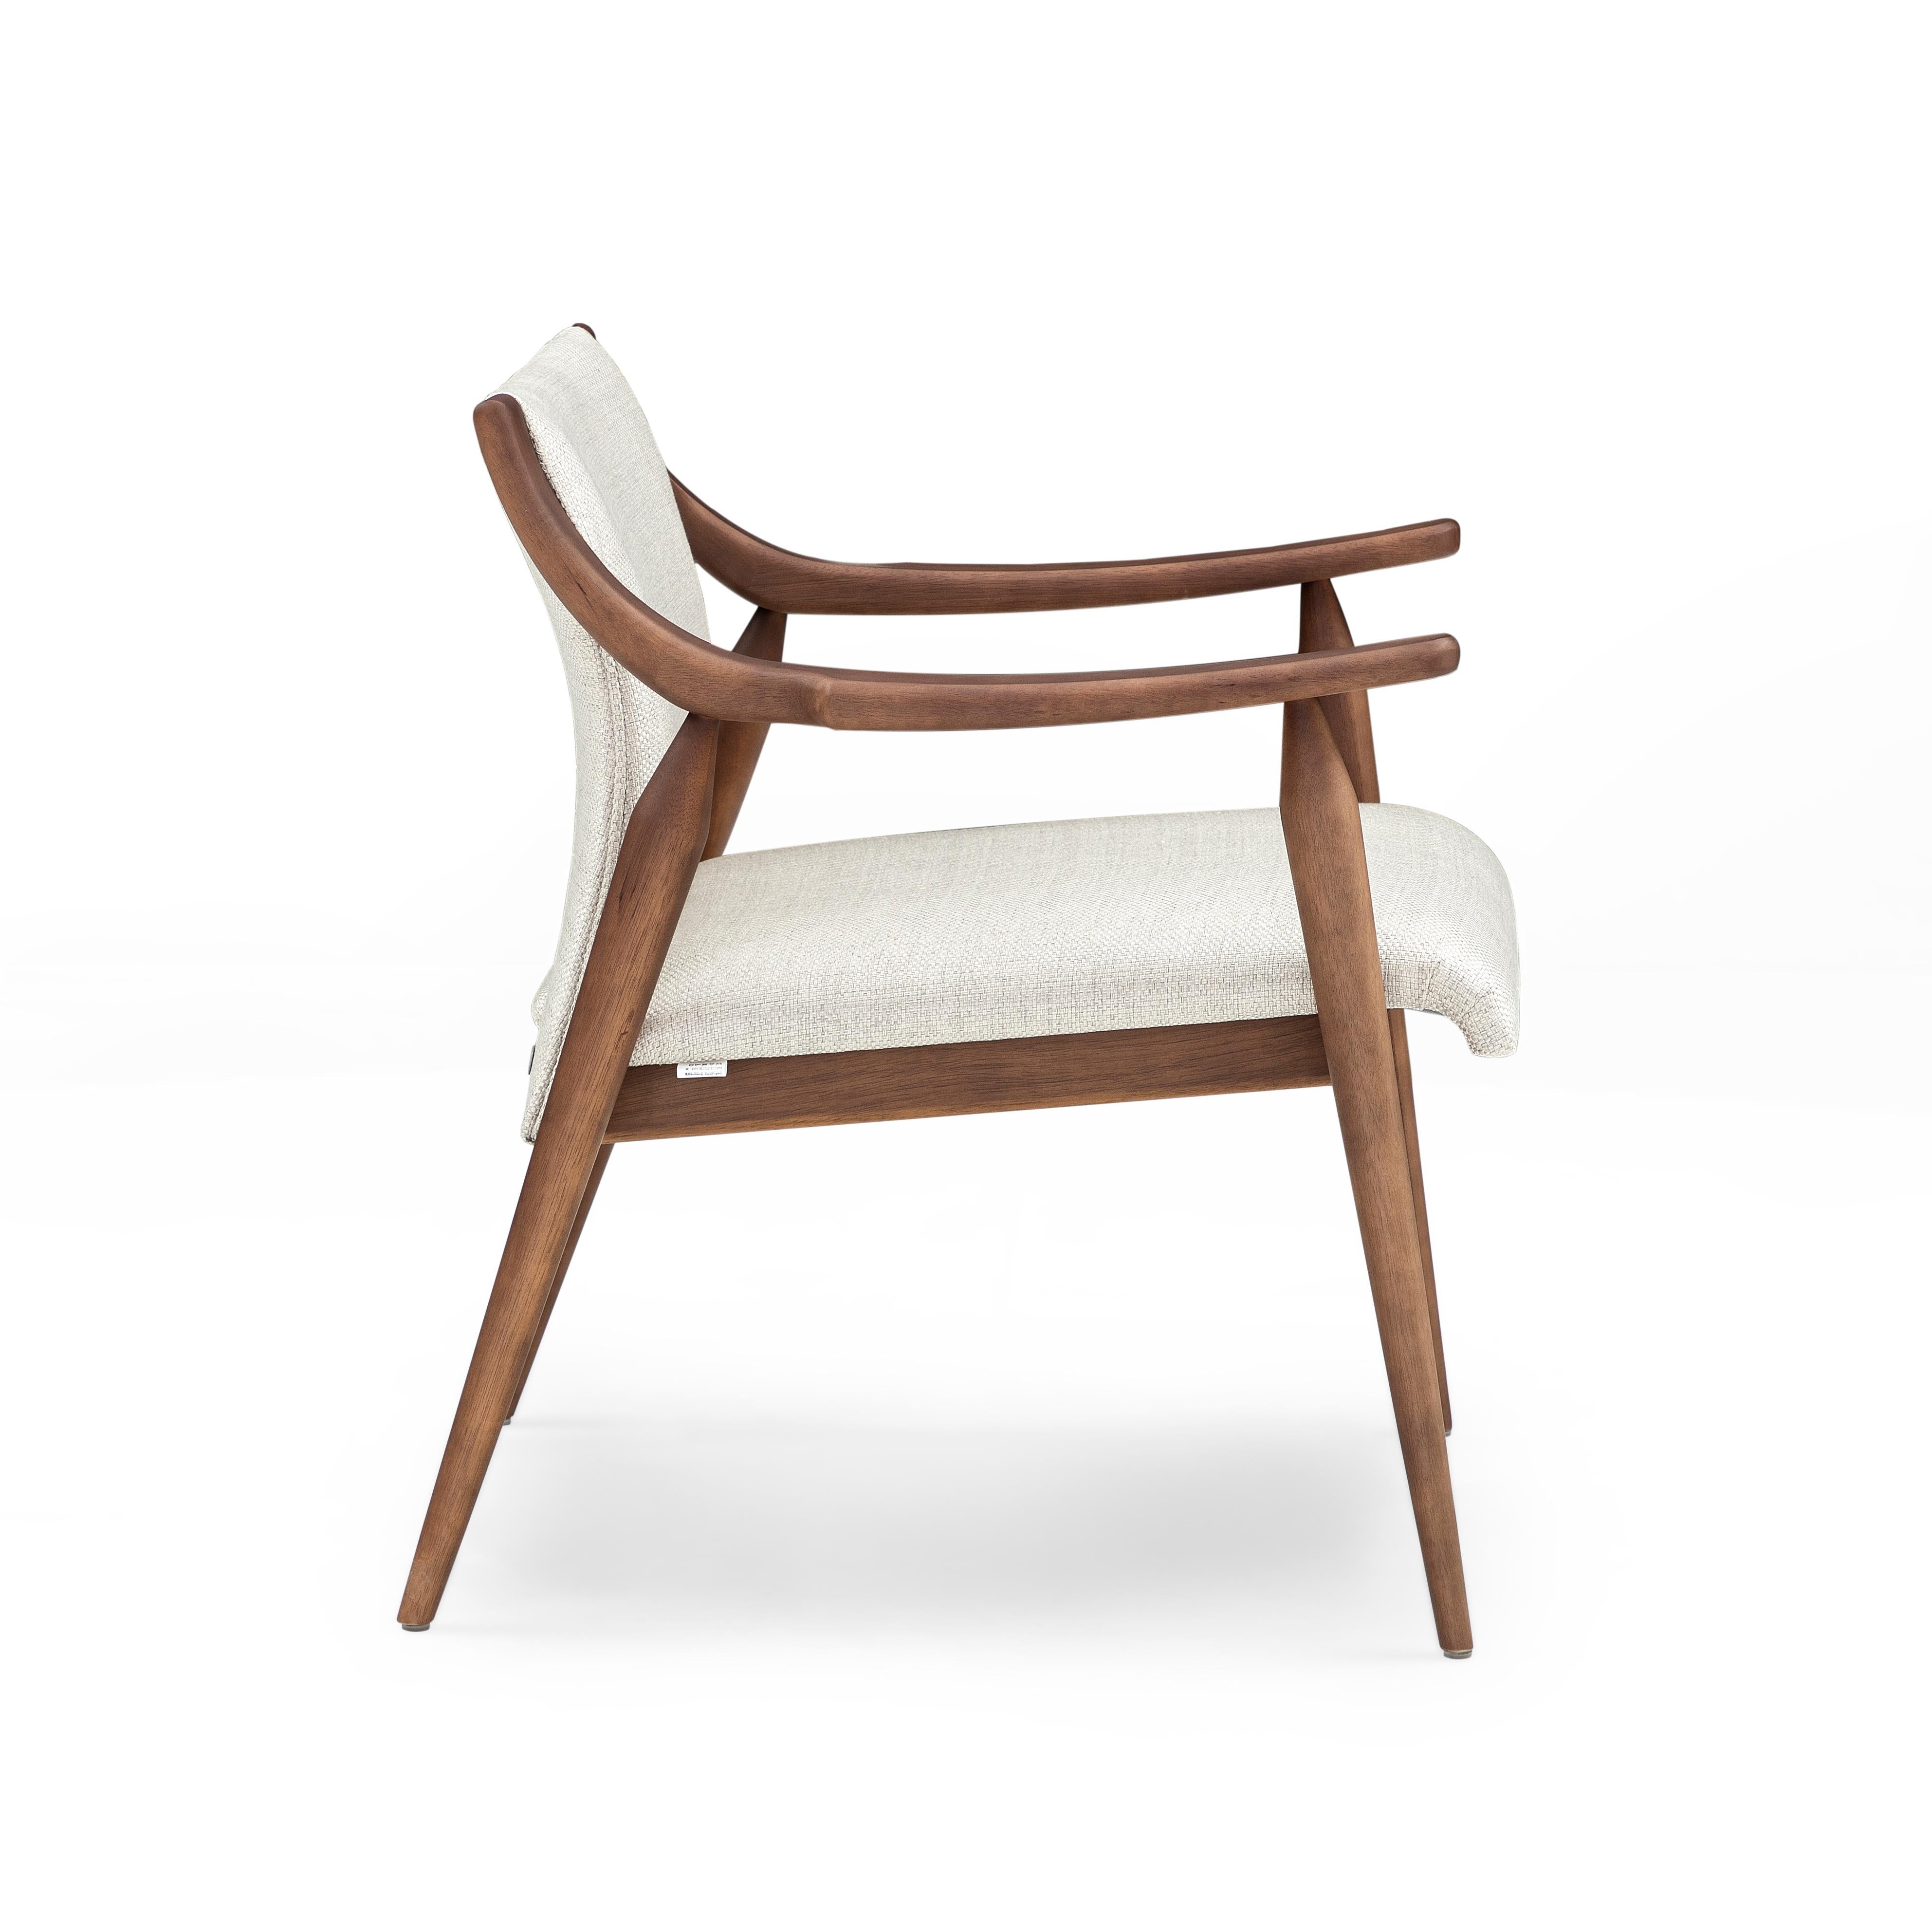 Mince Armchair Featuring Curved Arms and Spindle Legs in Walnut Wood Finish In New Condition For Sale In Miami, FL